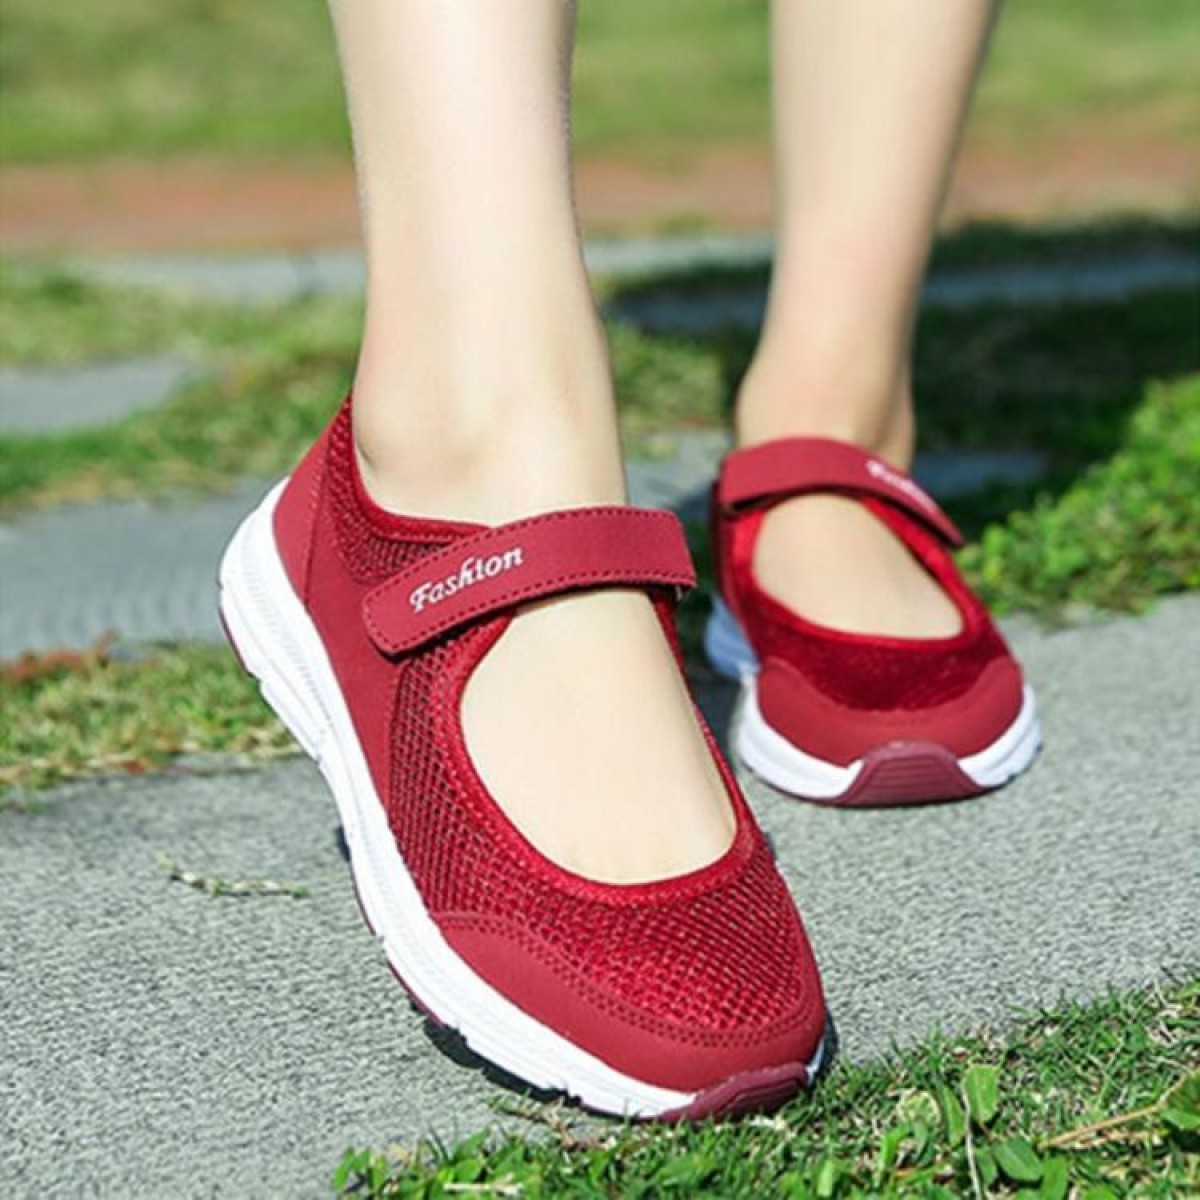 Women Casual Mesh Flat Shoes Soft Sneakers, Size:41(Red)